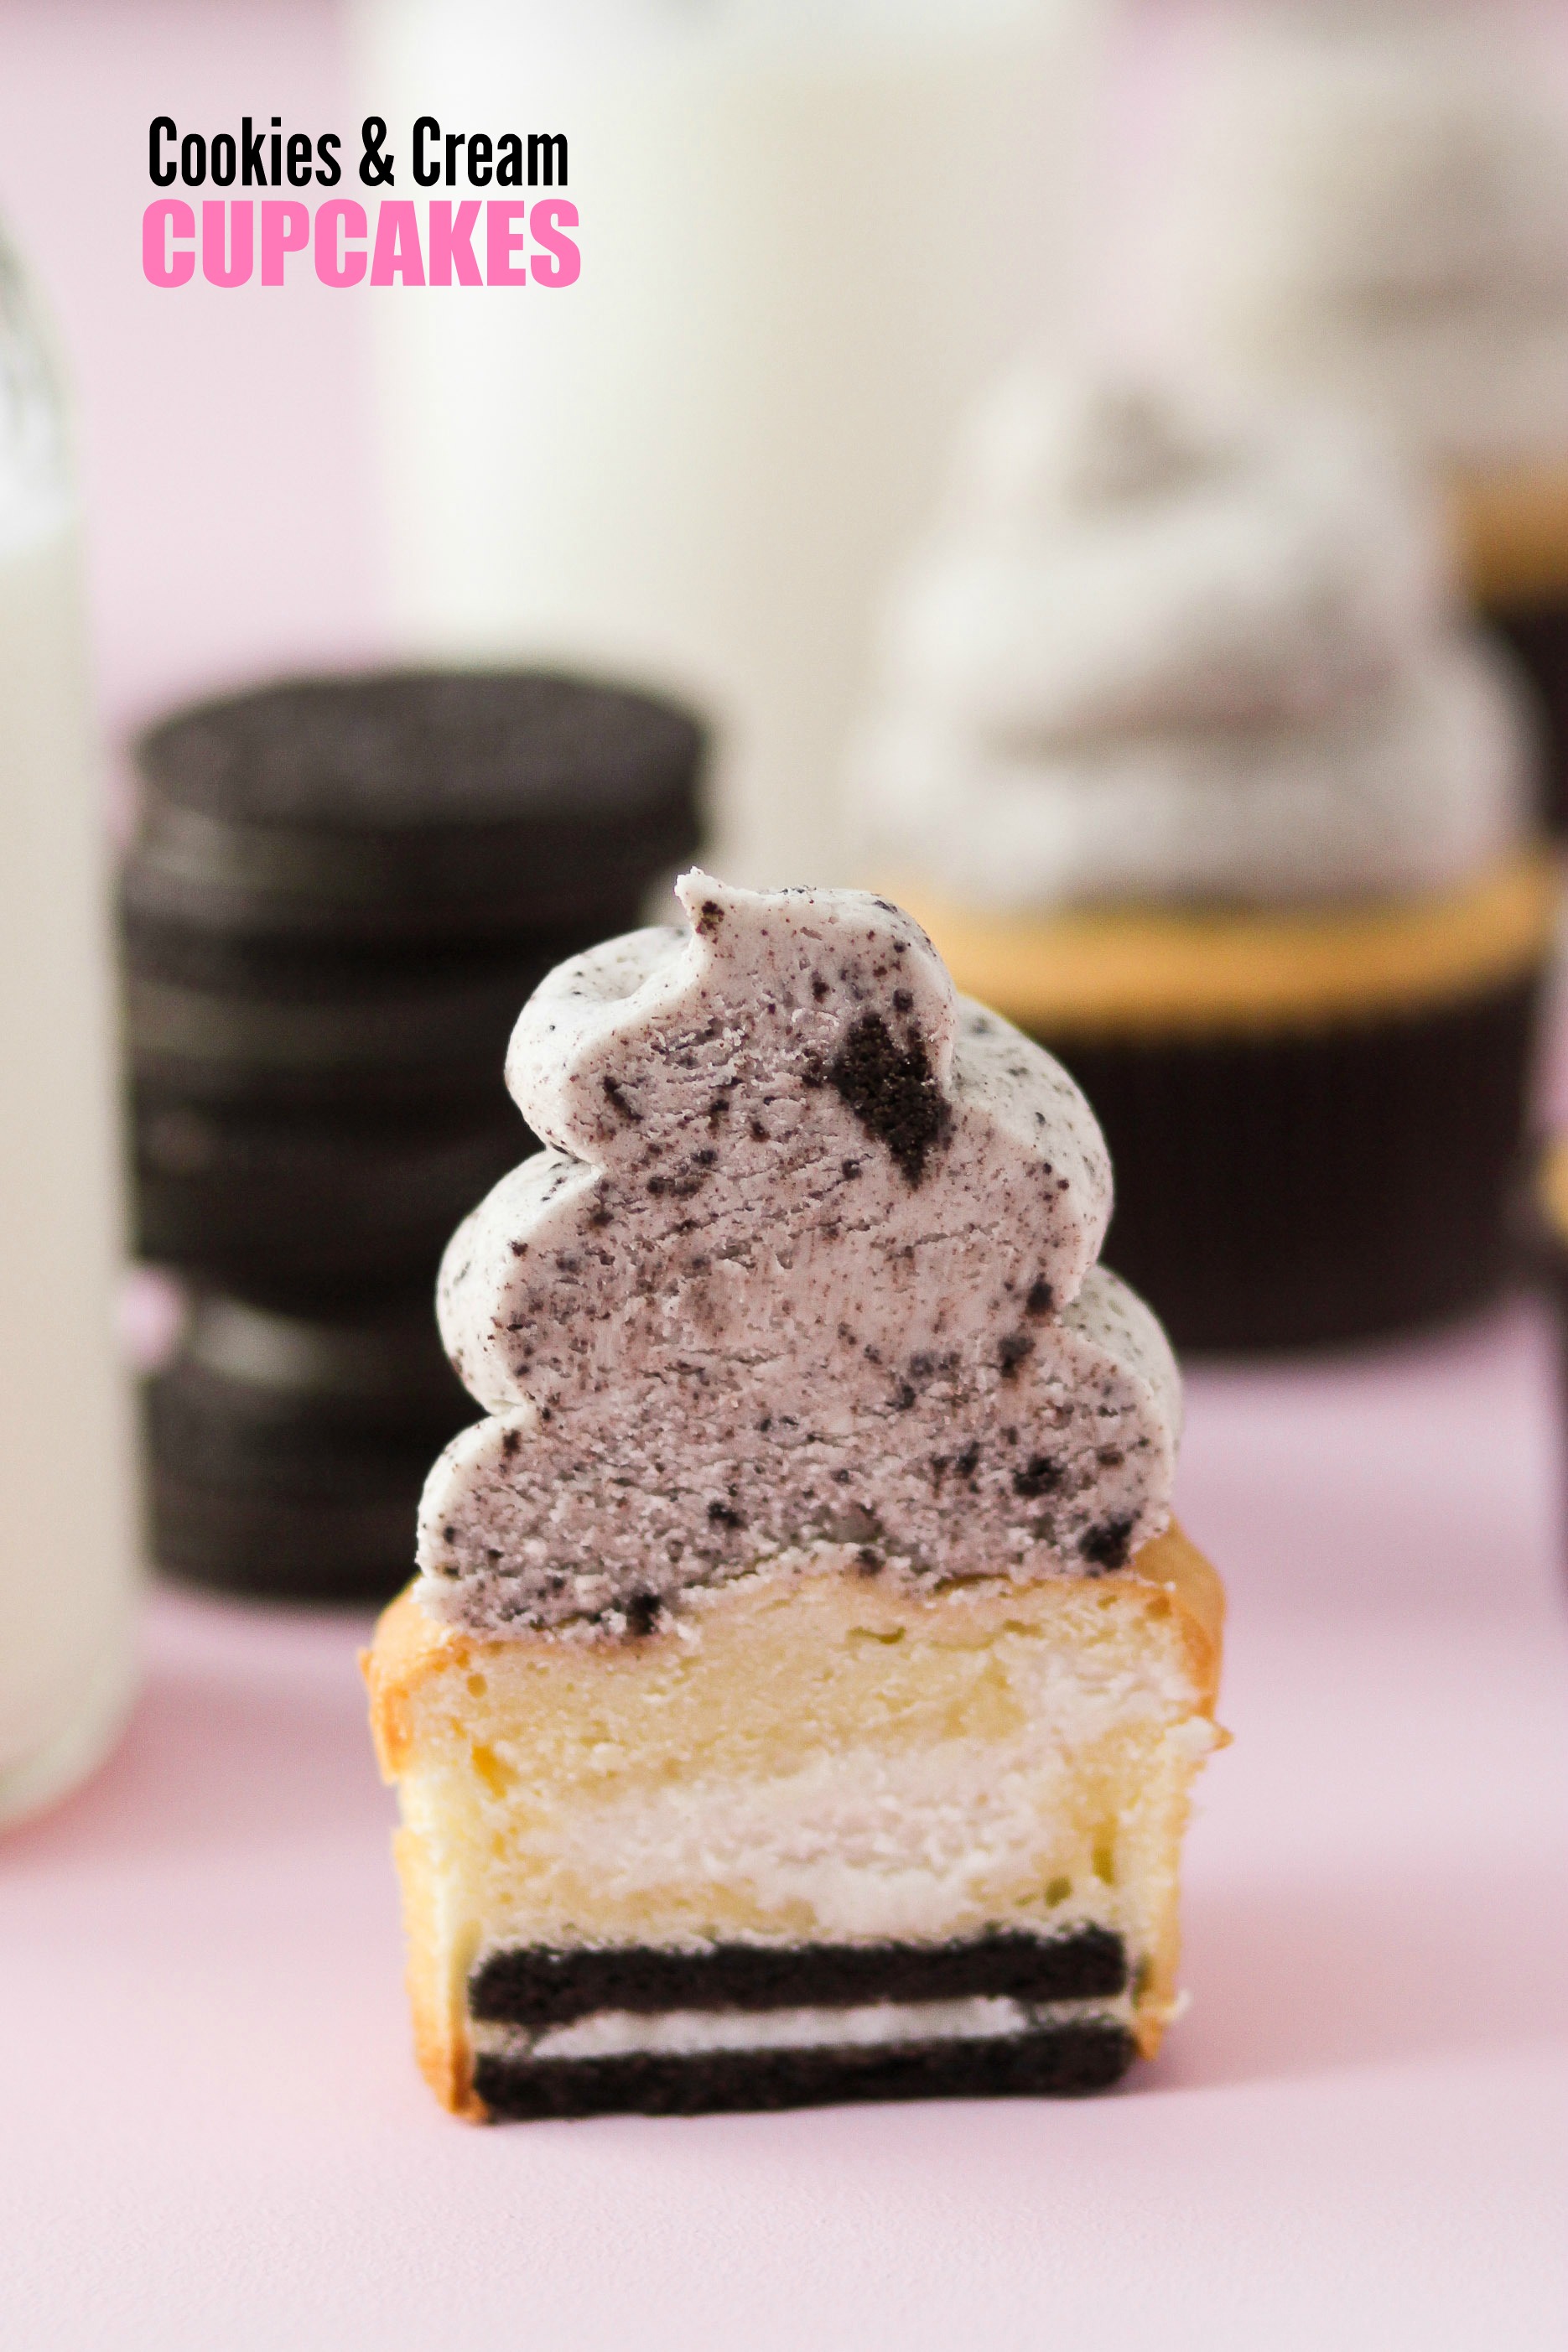 8 Photos of Cupcakes With Cookies And Cream Filling